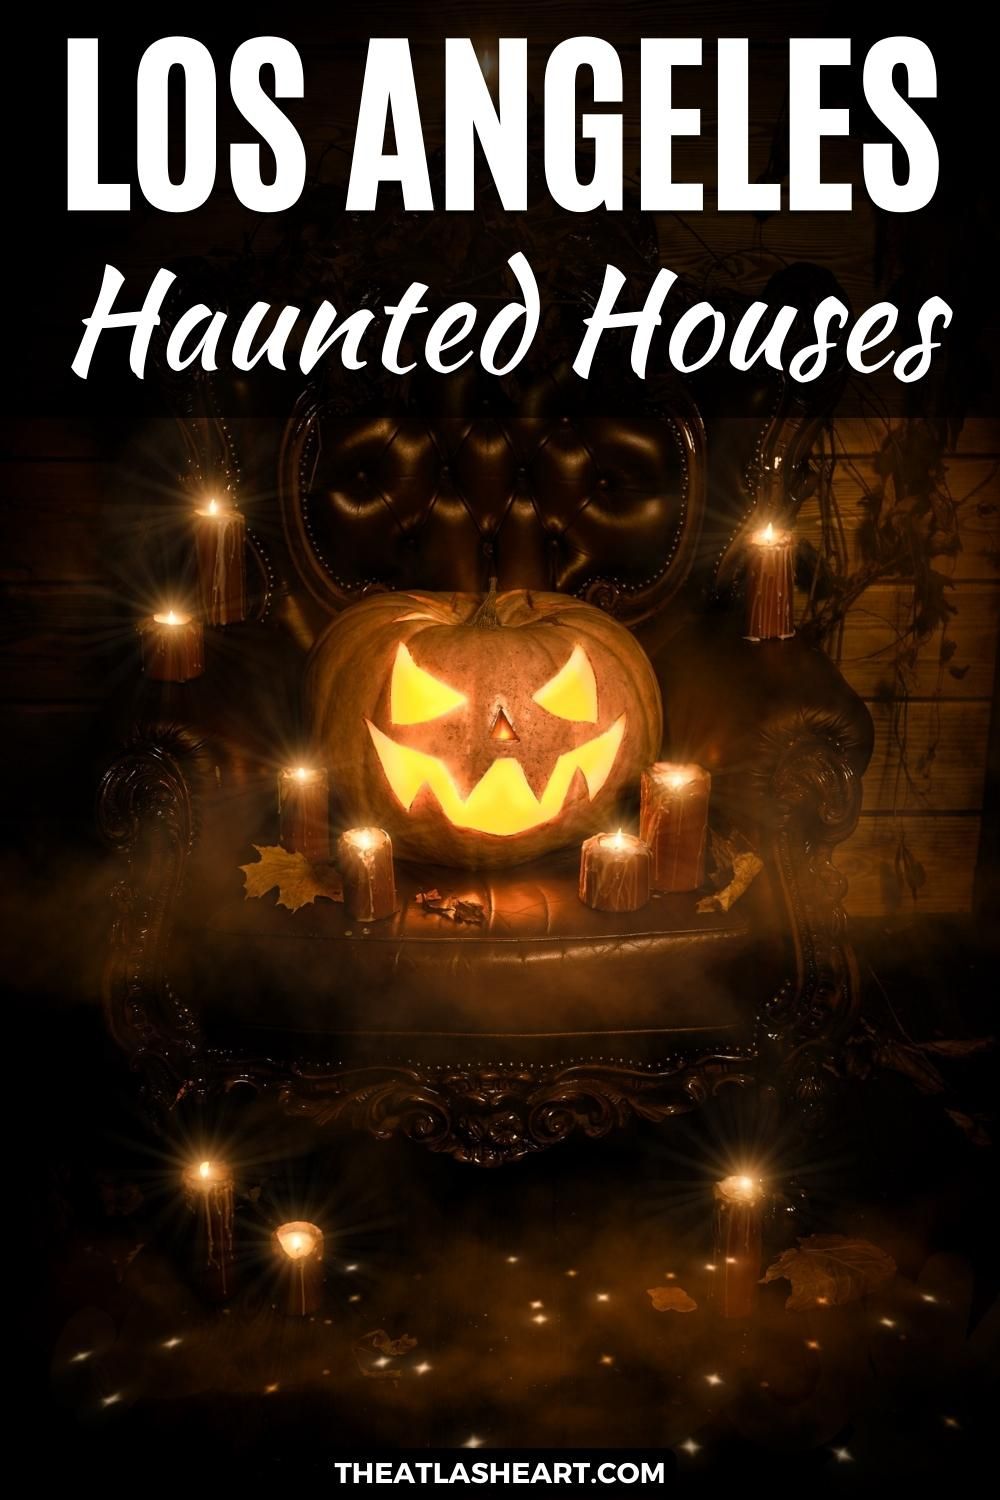 A glowing jack-o-lantern in dim light sits on an ornate leather armchair, surrounded by candles and fall leaves, with the text overlay, "Los Angeles Haunted Houses."